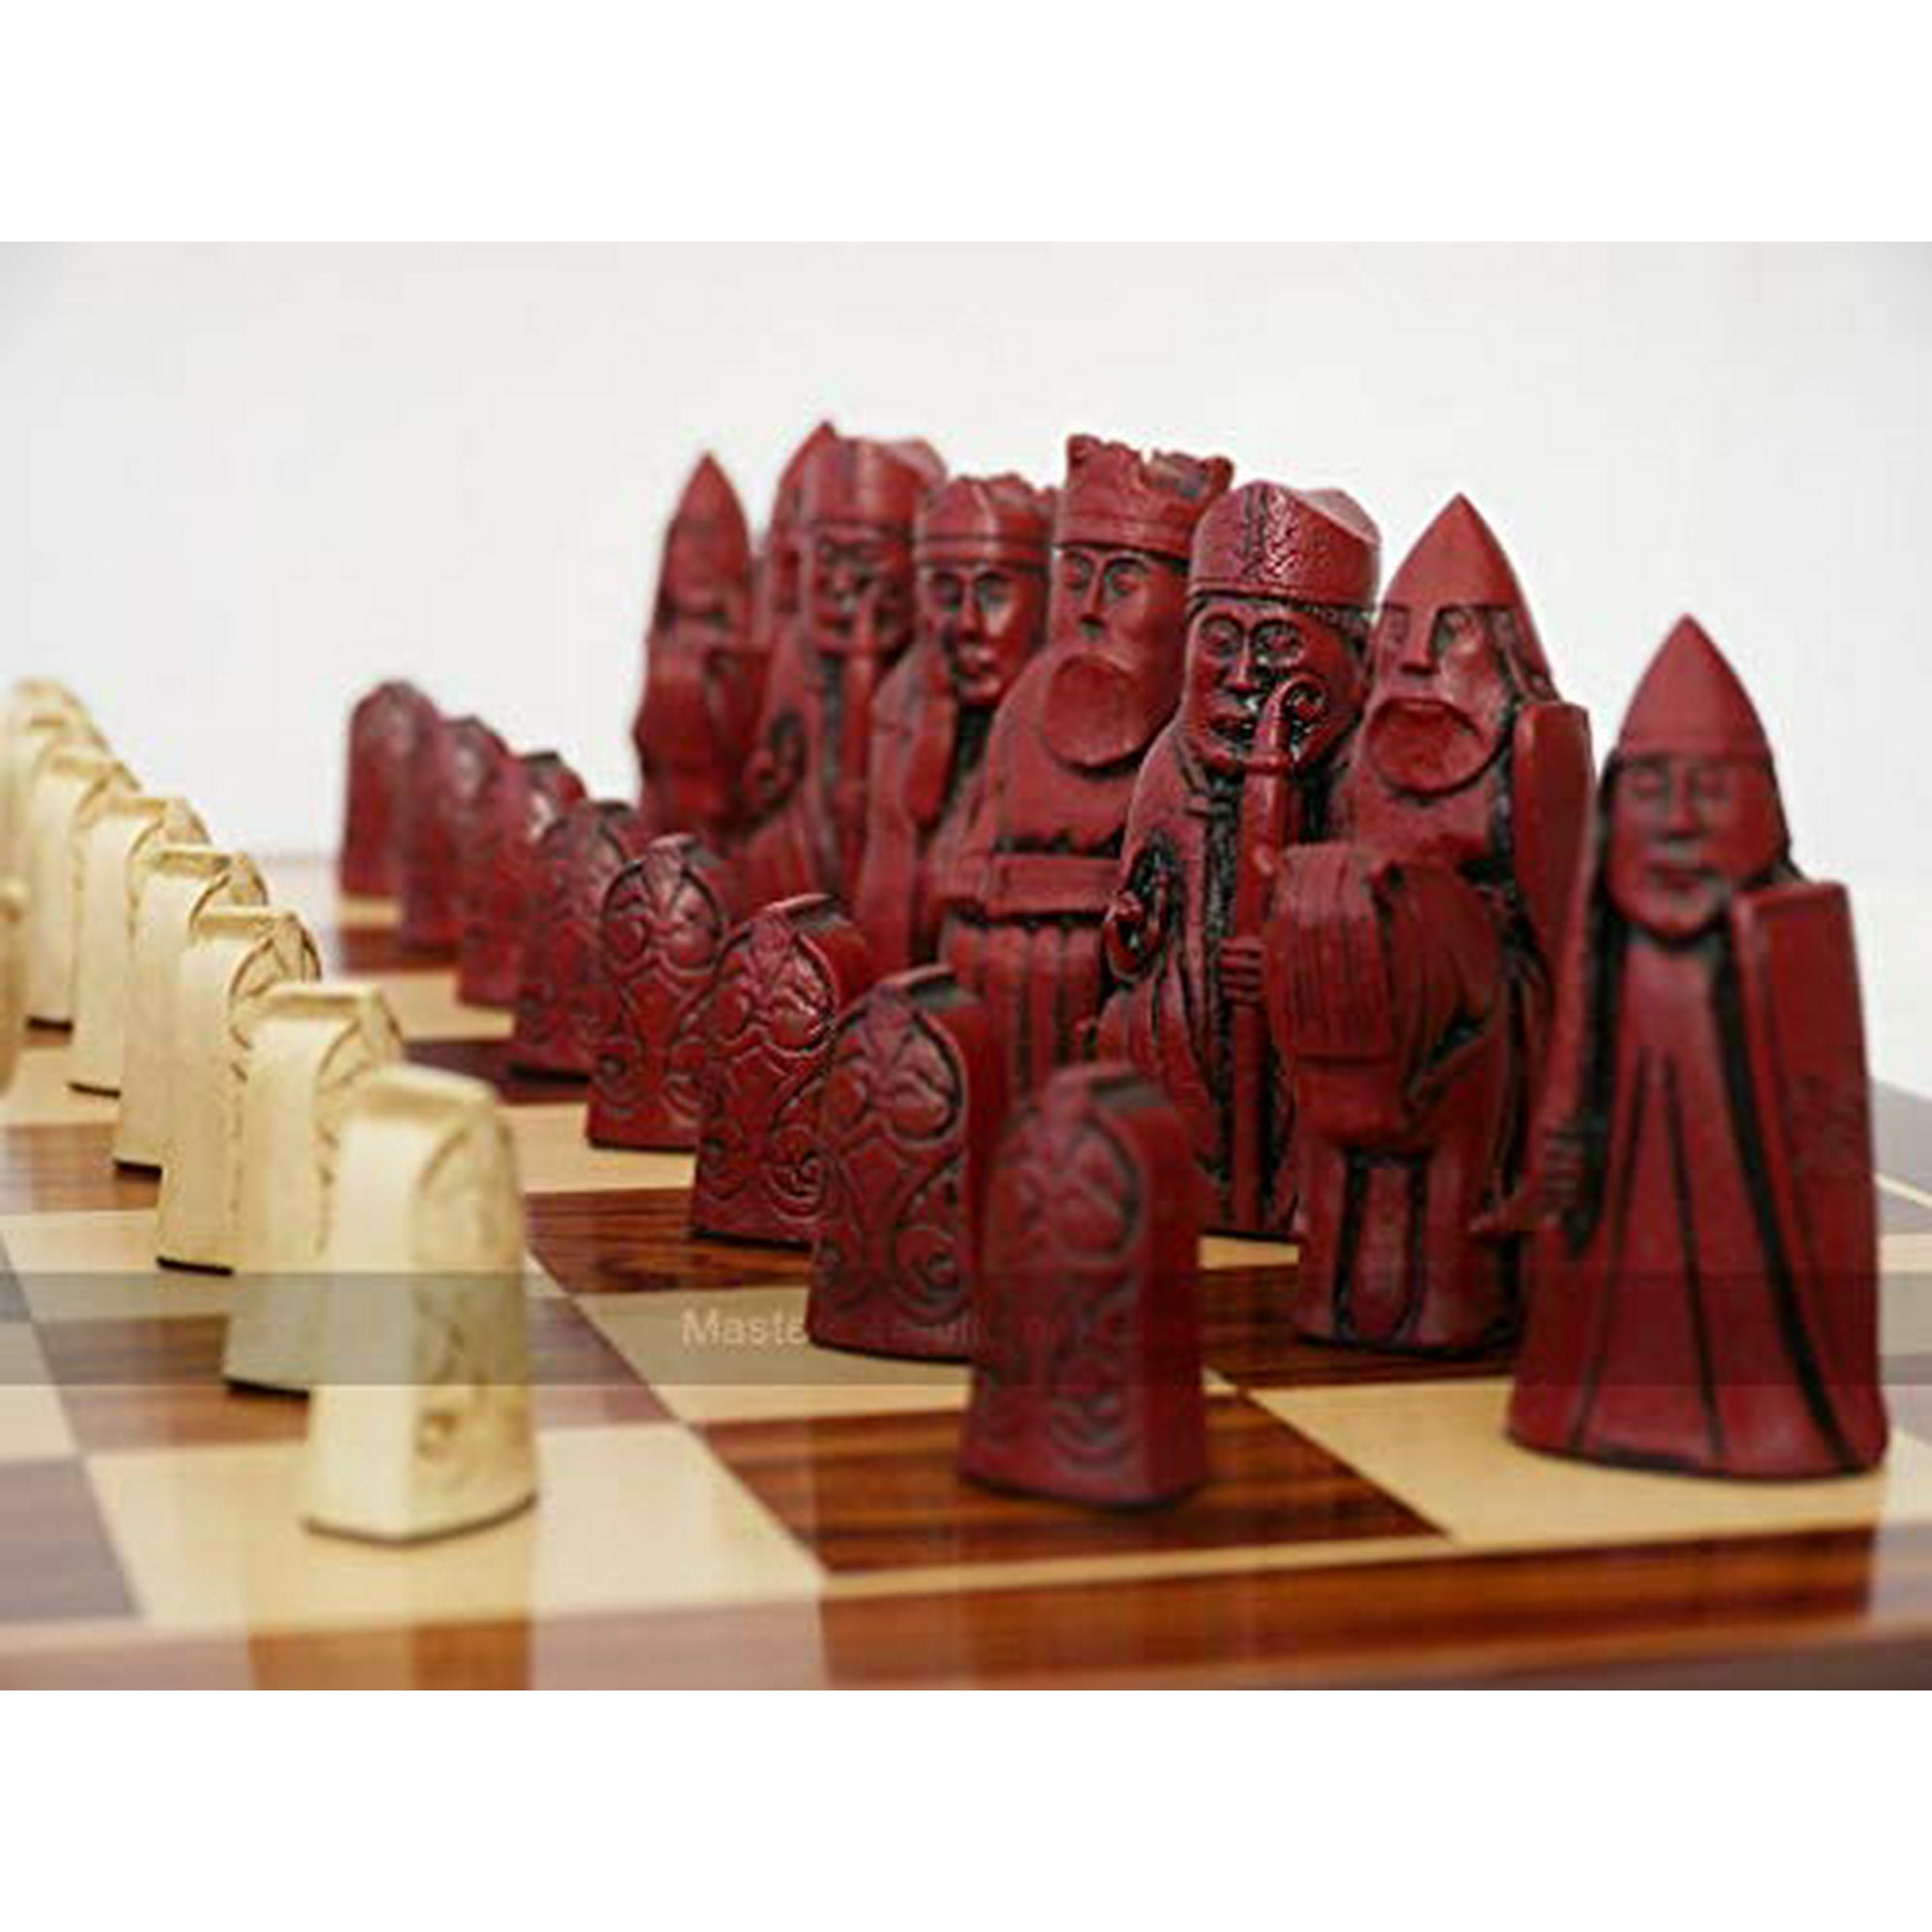 cream and red, board not included Berkeley Shakespeare Ornamental Chess Set